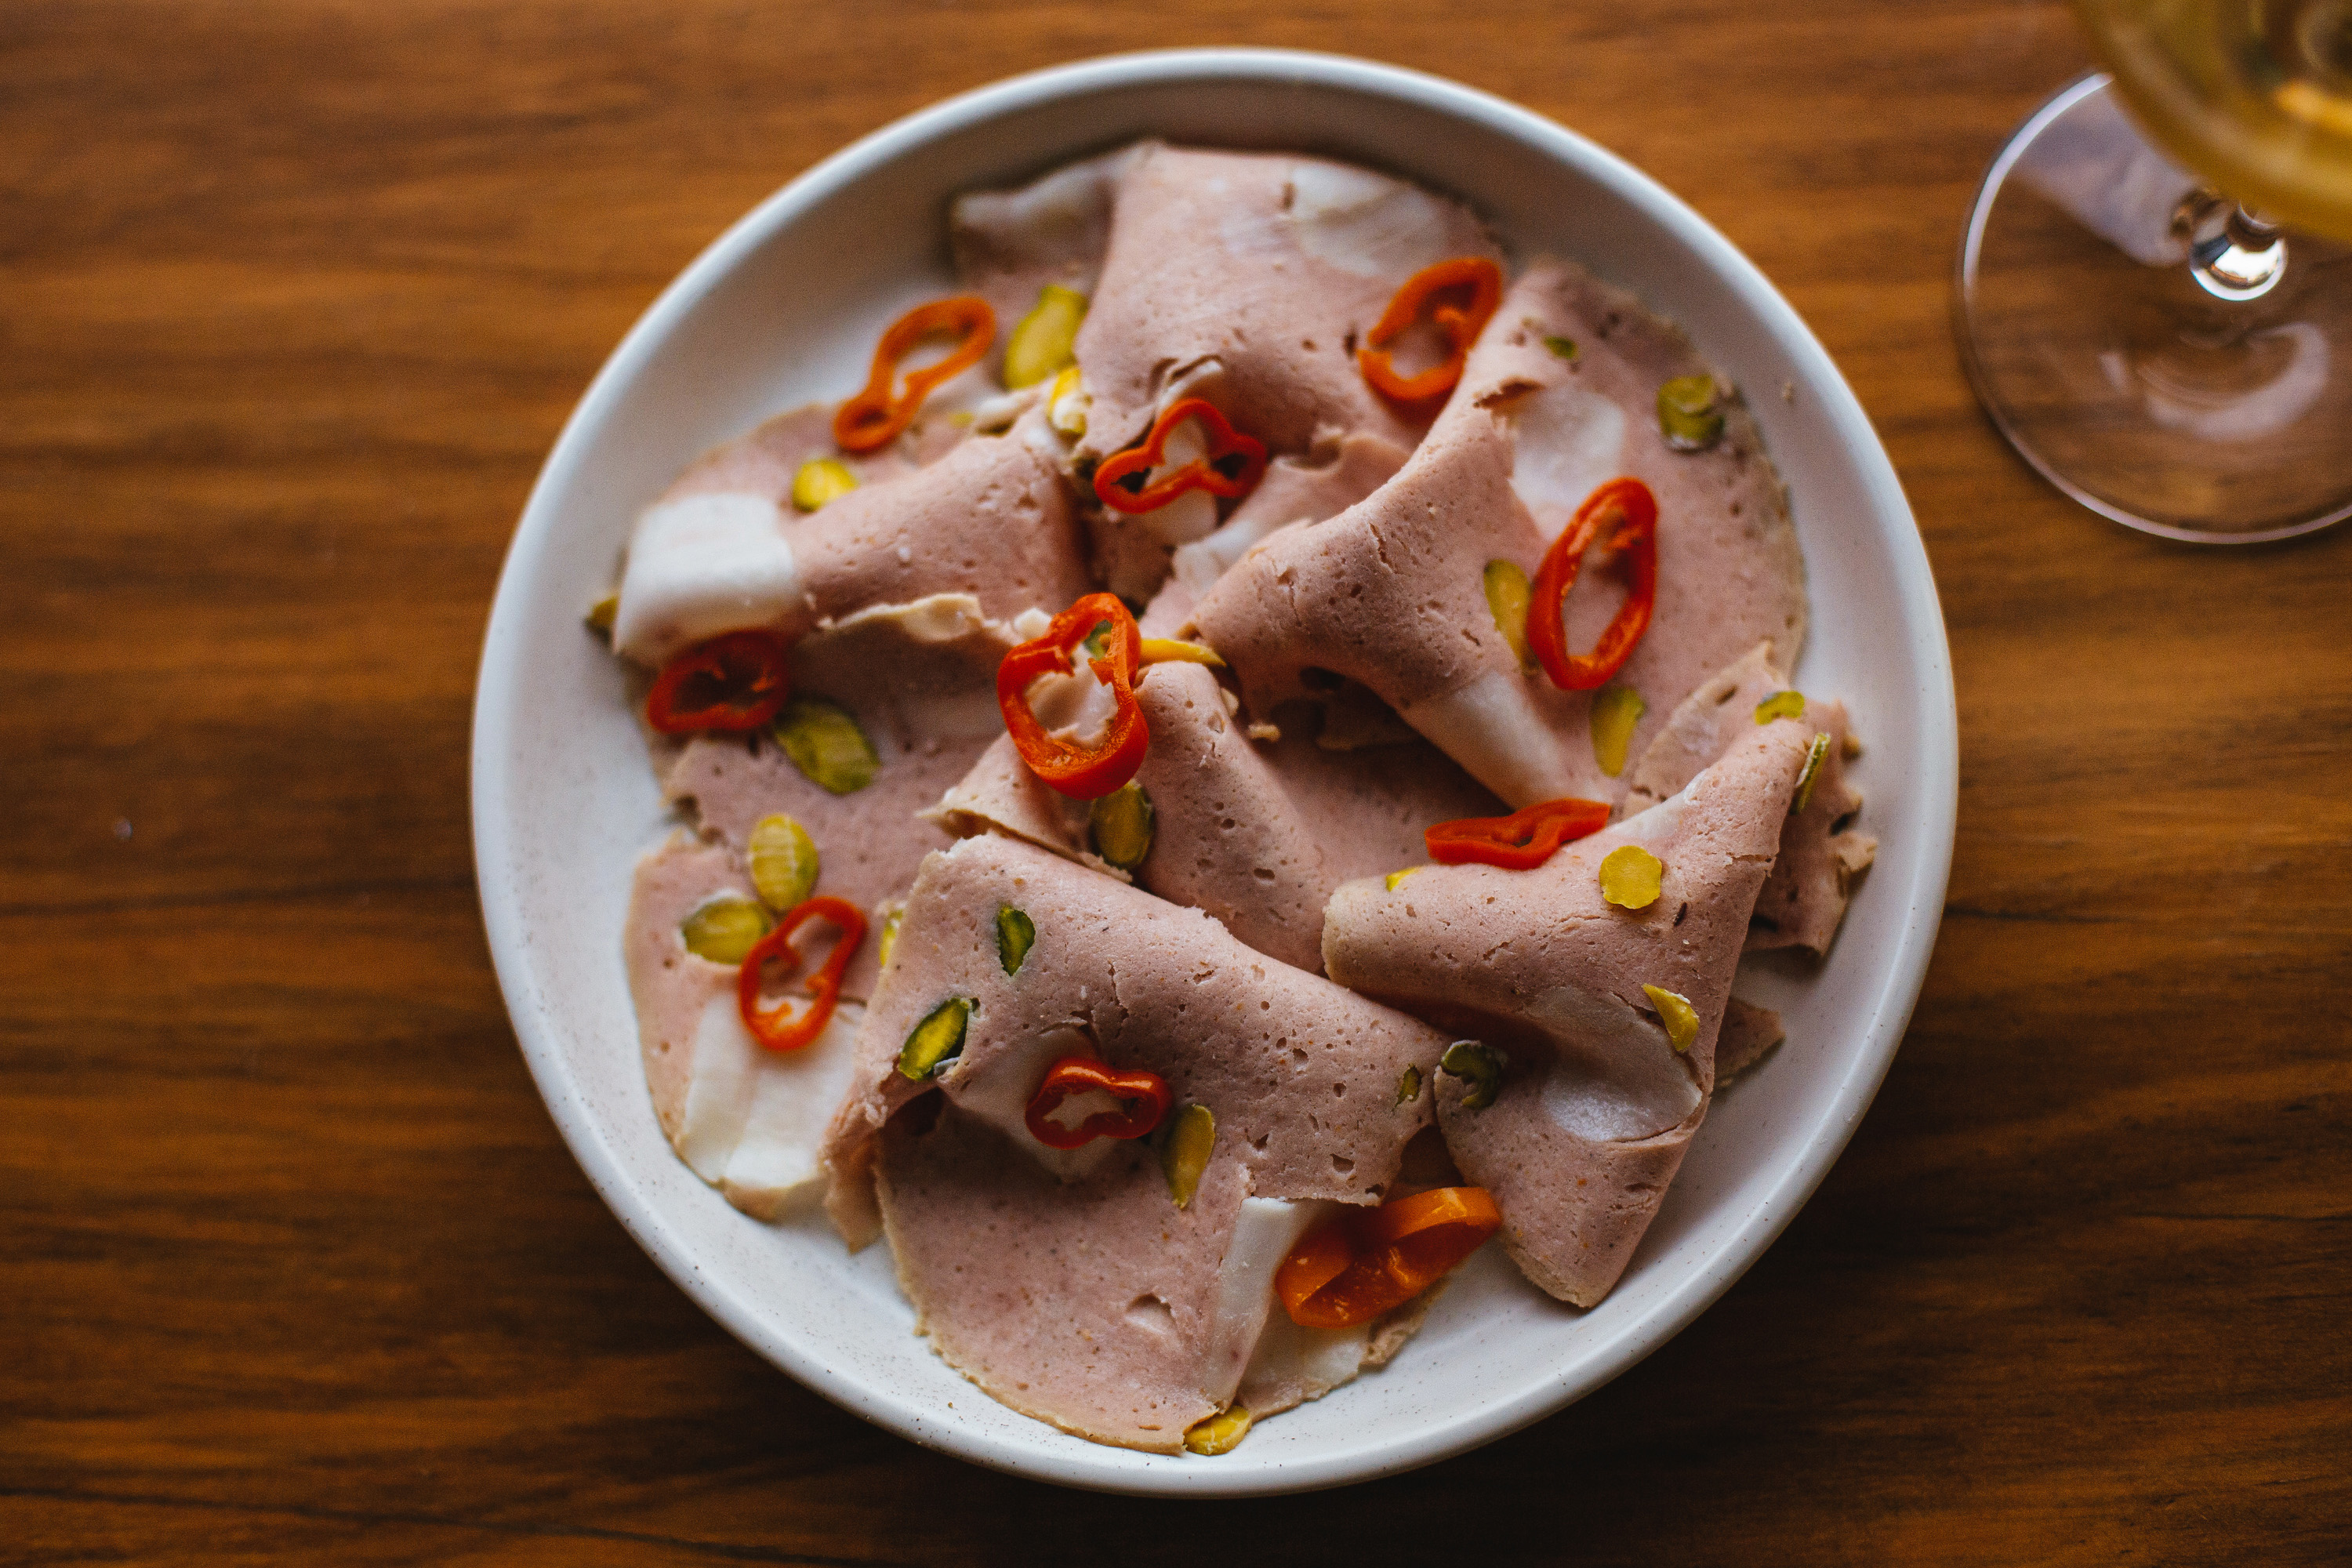 mortadella on a plate with peppers